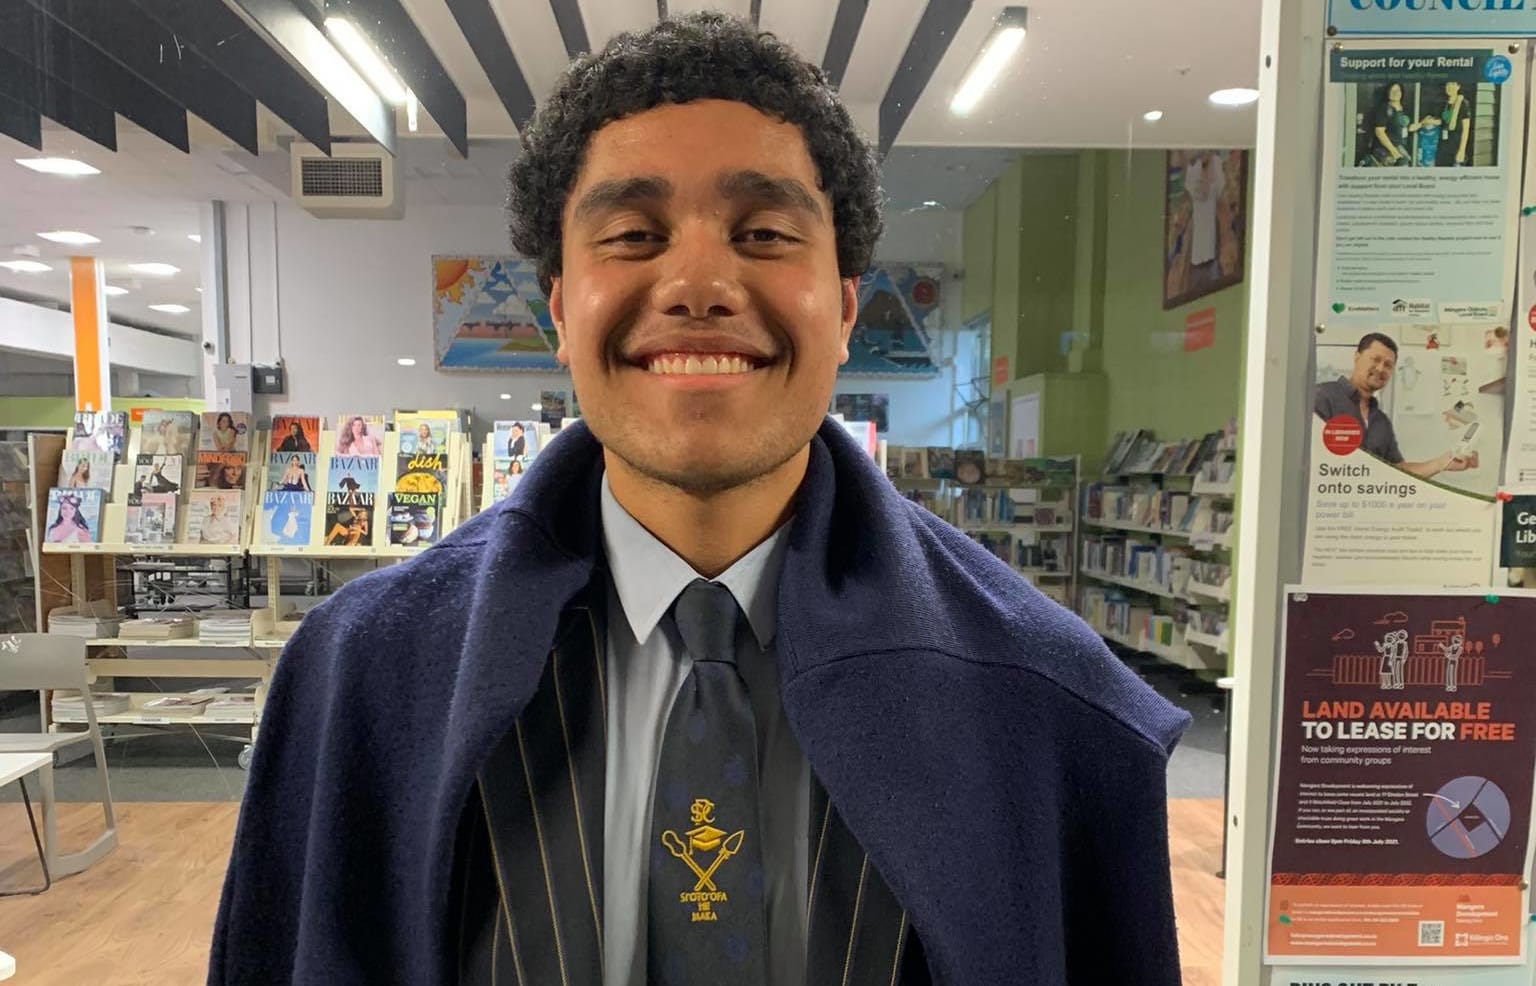 St Peters College Year 13 Nalesoni Maiava shakes off negative stereotypes of his neighbourhood.